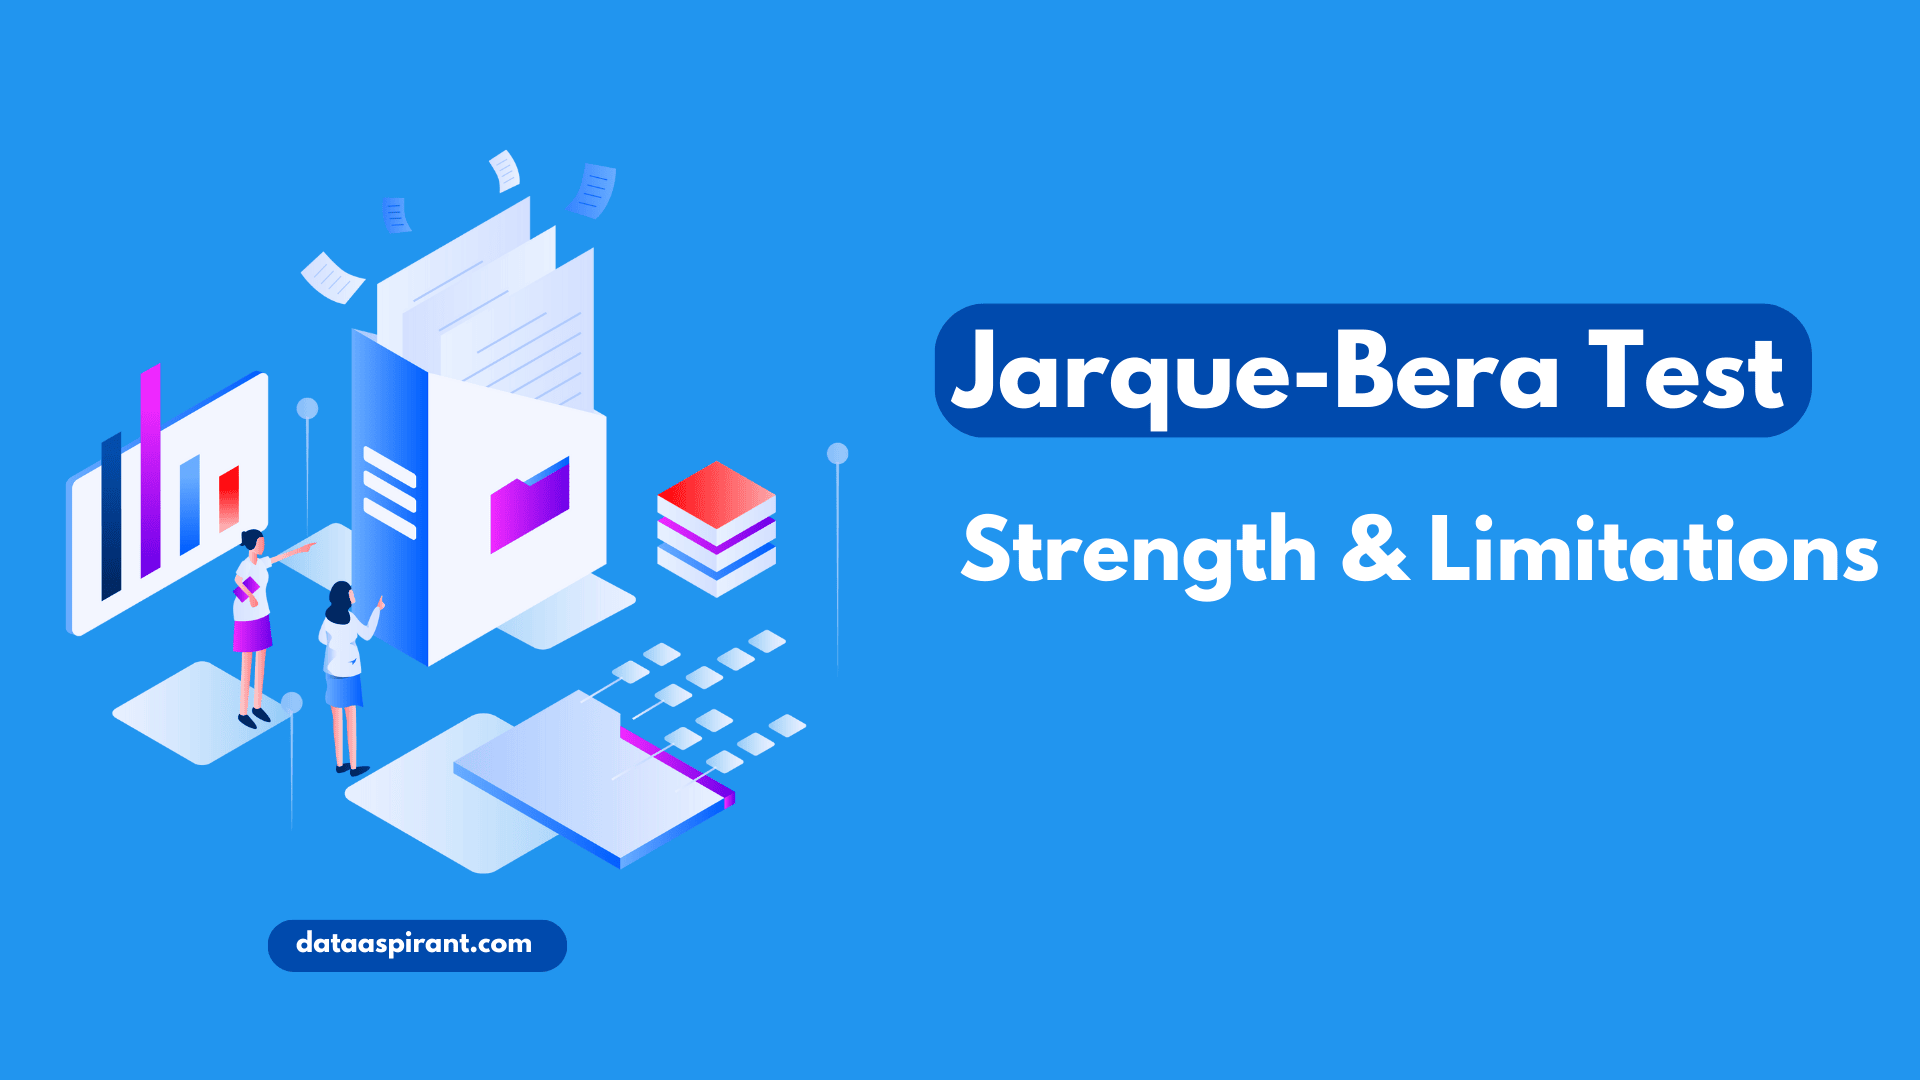 Strengths and Limitations Of Jarque-Bera Test